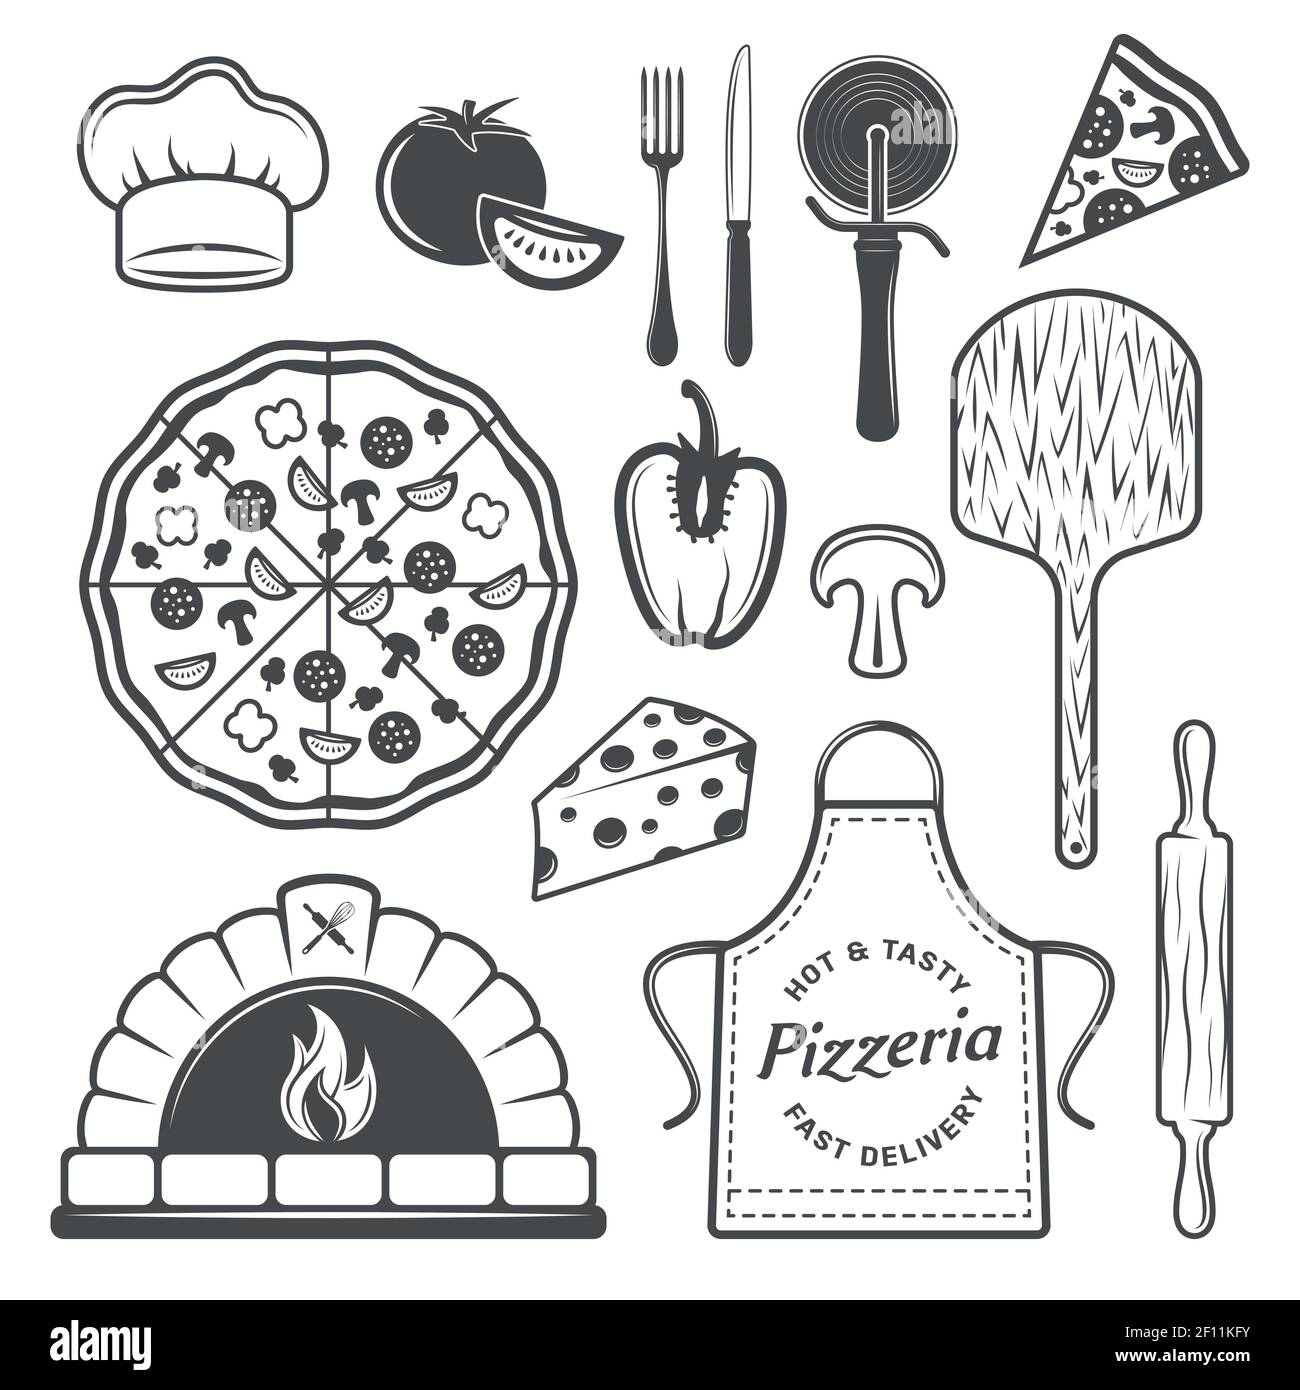 Pizzeria monochrome elements set with cooked product and vegetables uniform of chef culinary utensils isolated vector illustration Stock Vector